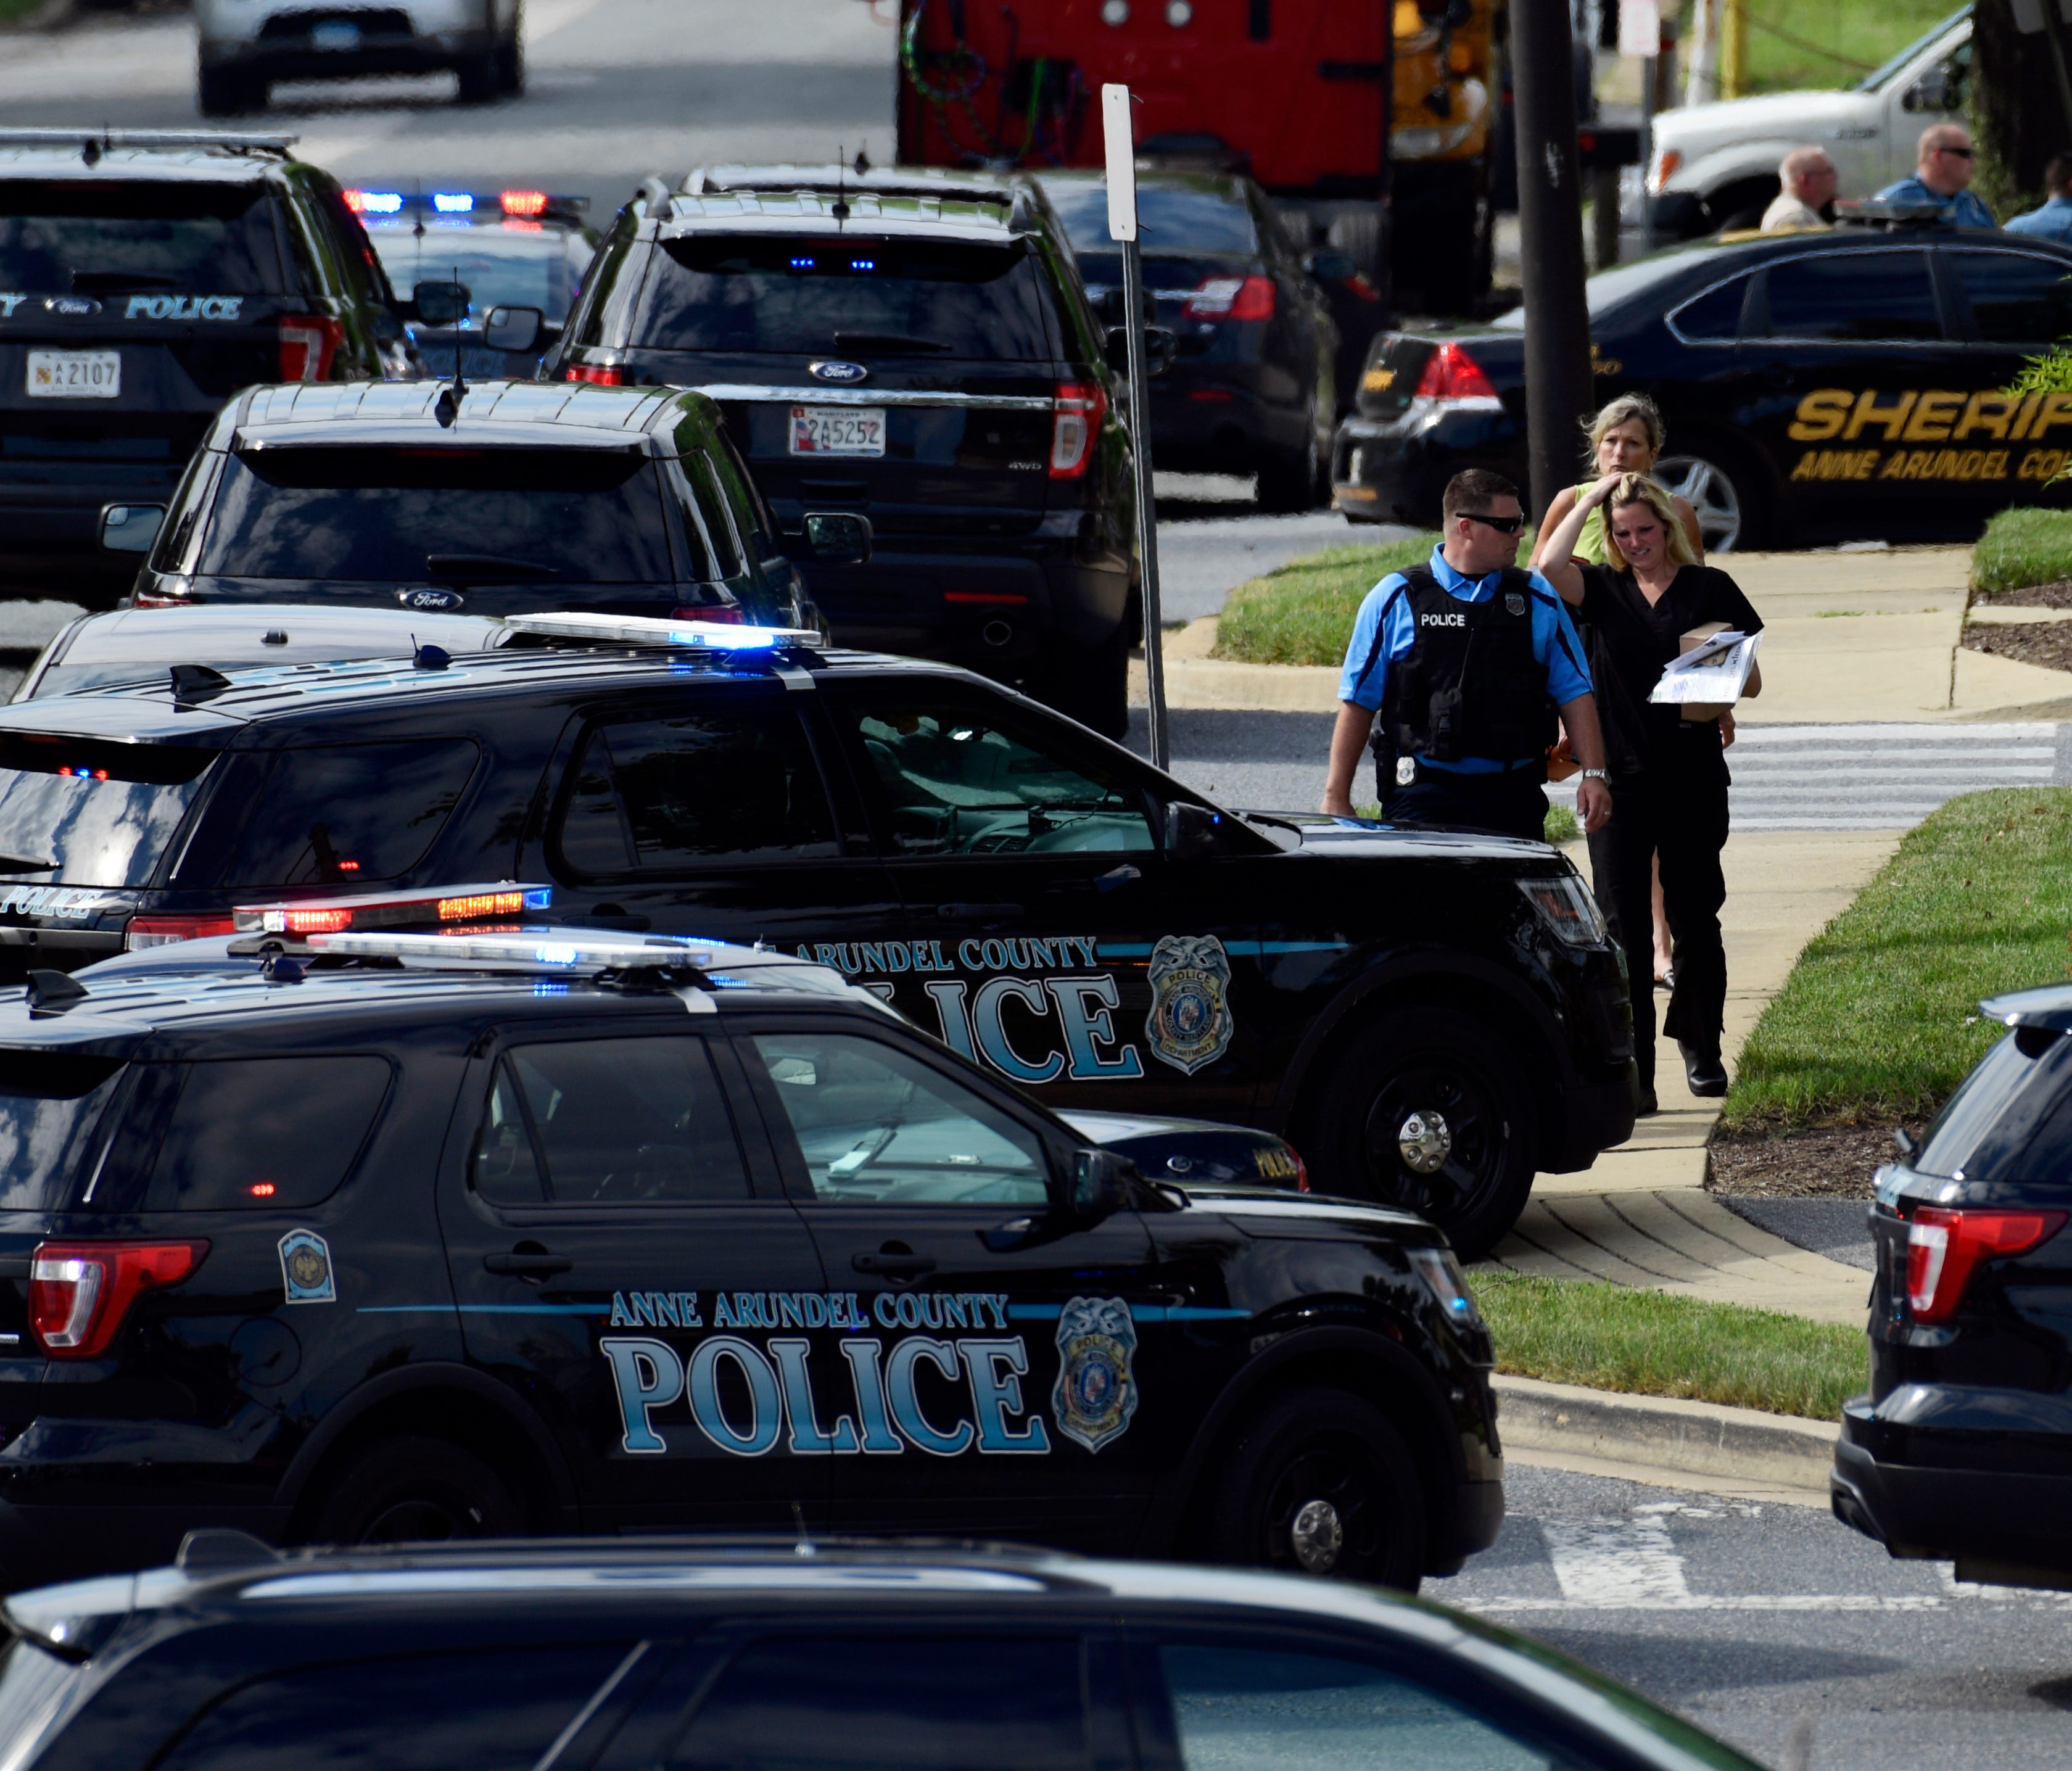 Police secure the scene of a shooting at the building housing The Capital Gazette newspaper in Annapolis, Md., on June 28, 2018.